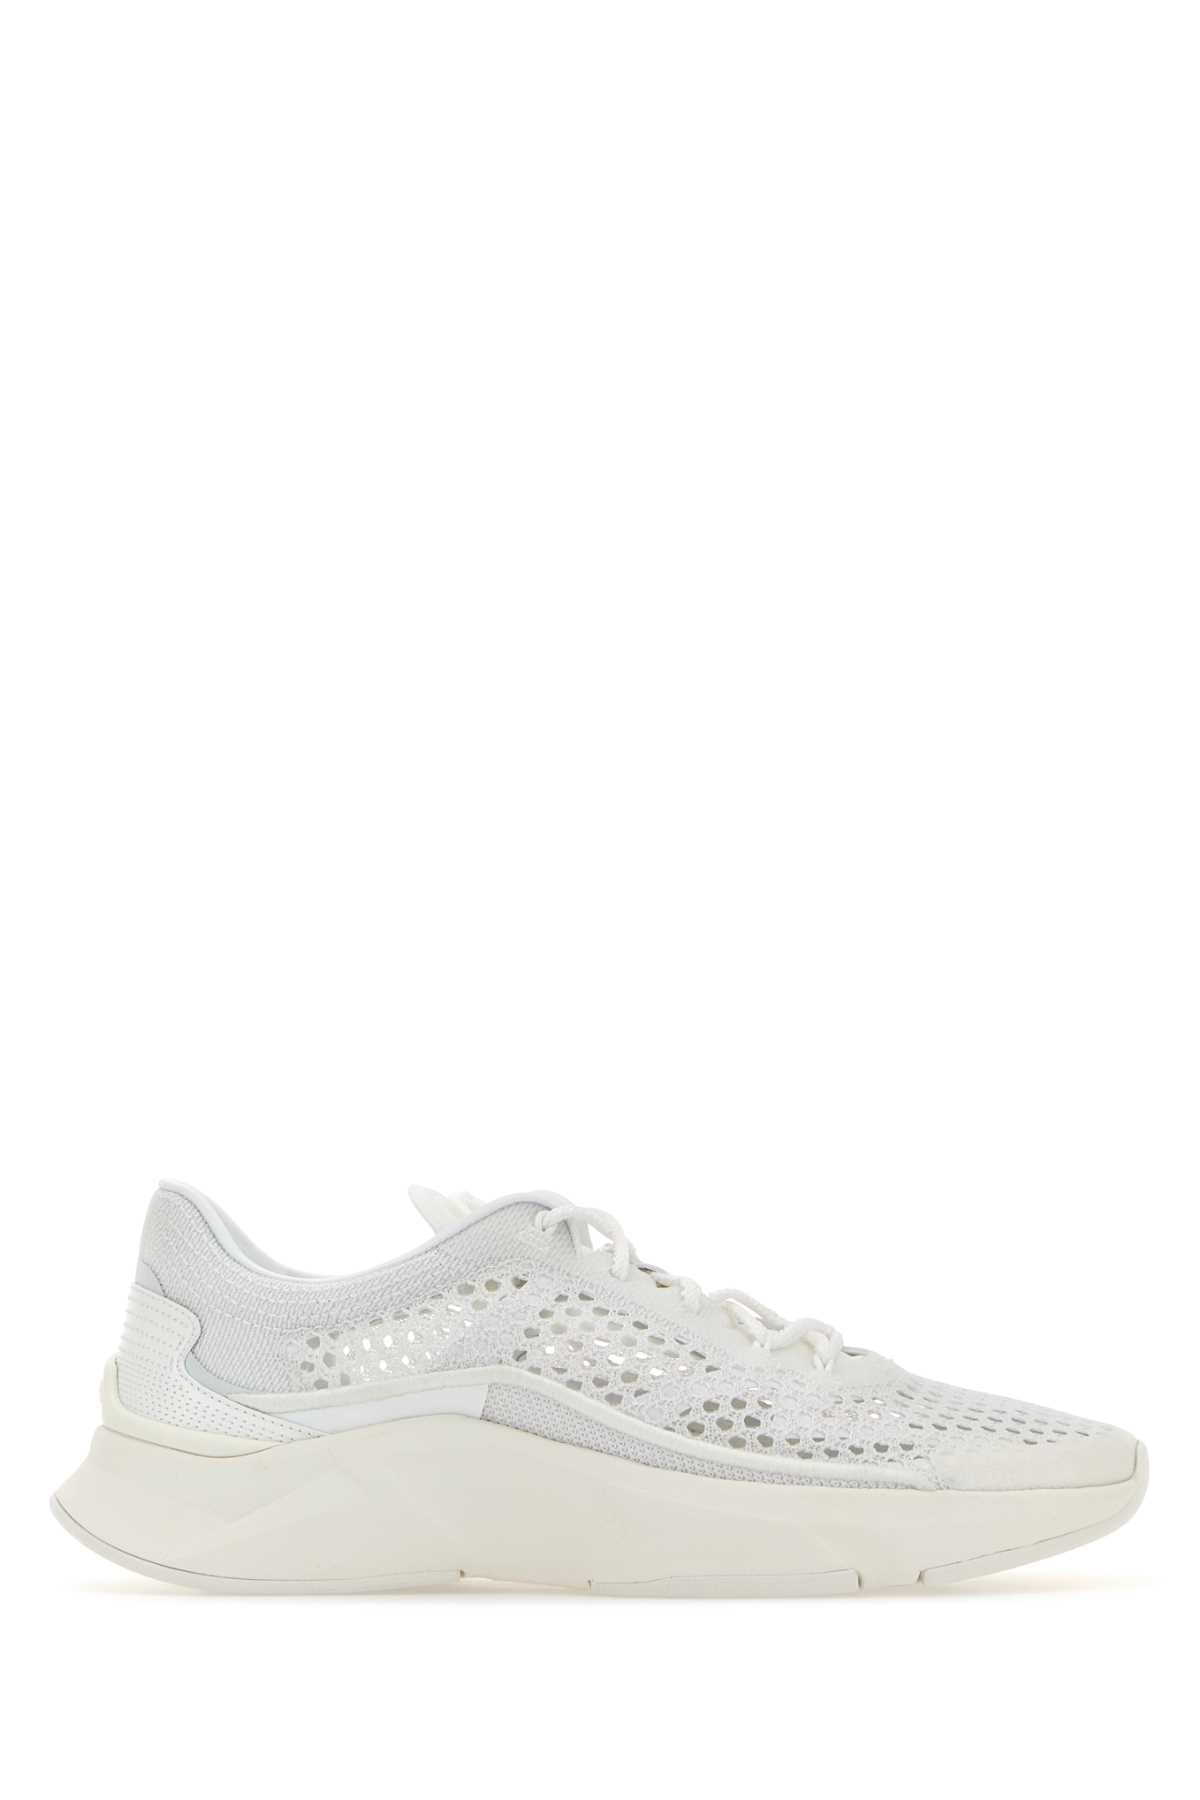 Shop Valentino White Mesh True Actress Sneakers In Biancobiancobiancobianco